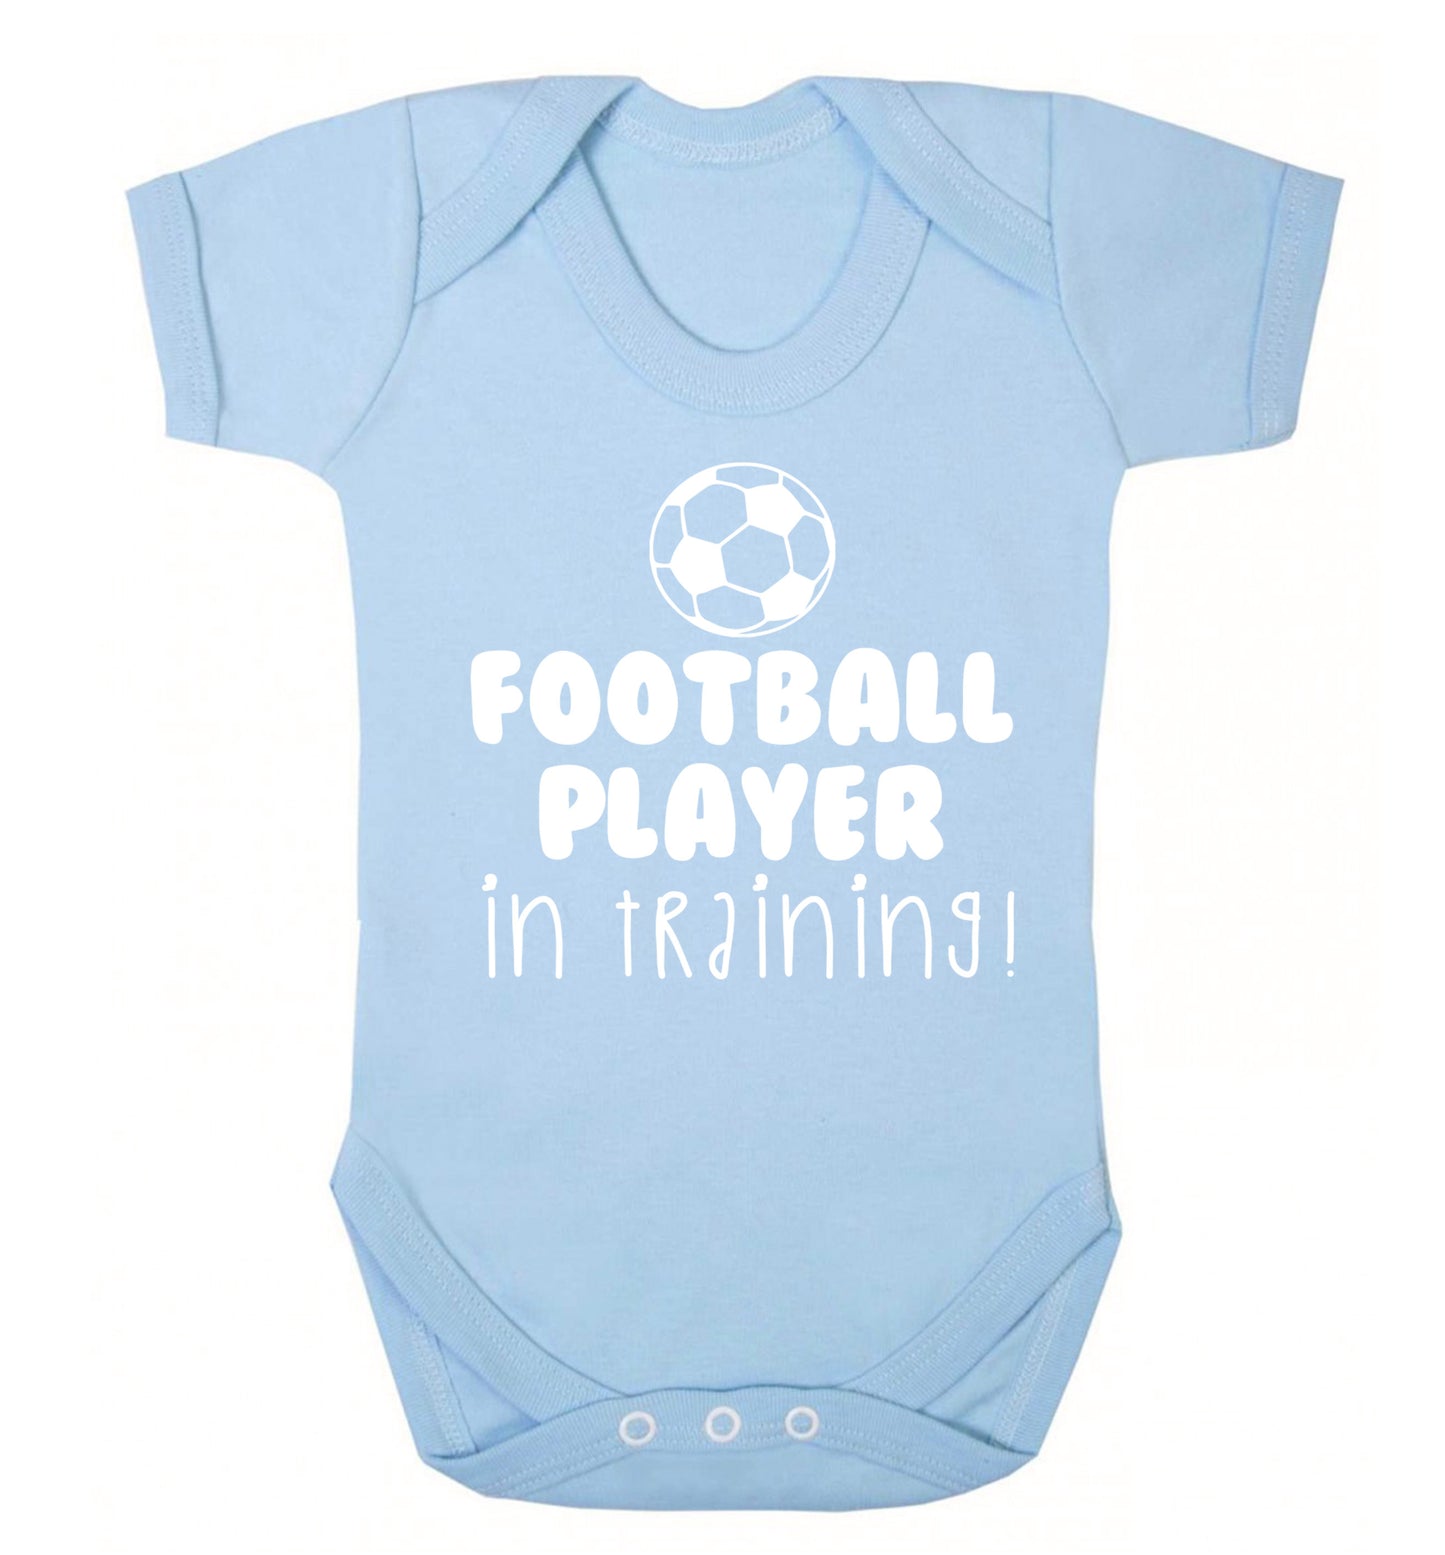 Football player in training Baby Vest pale blue 18-24 months